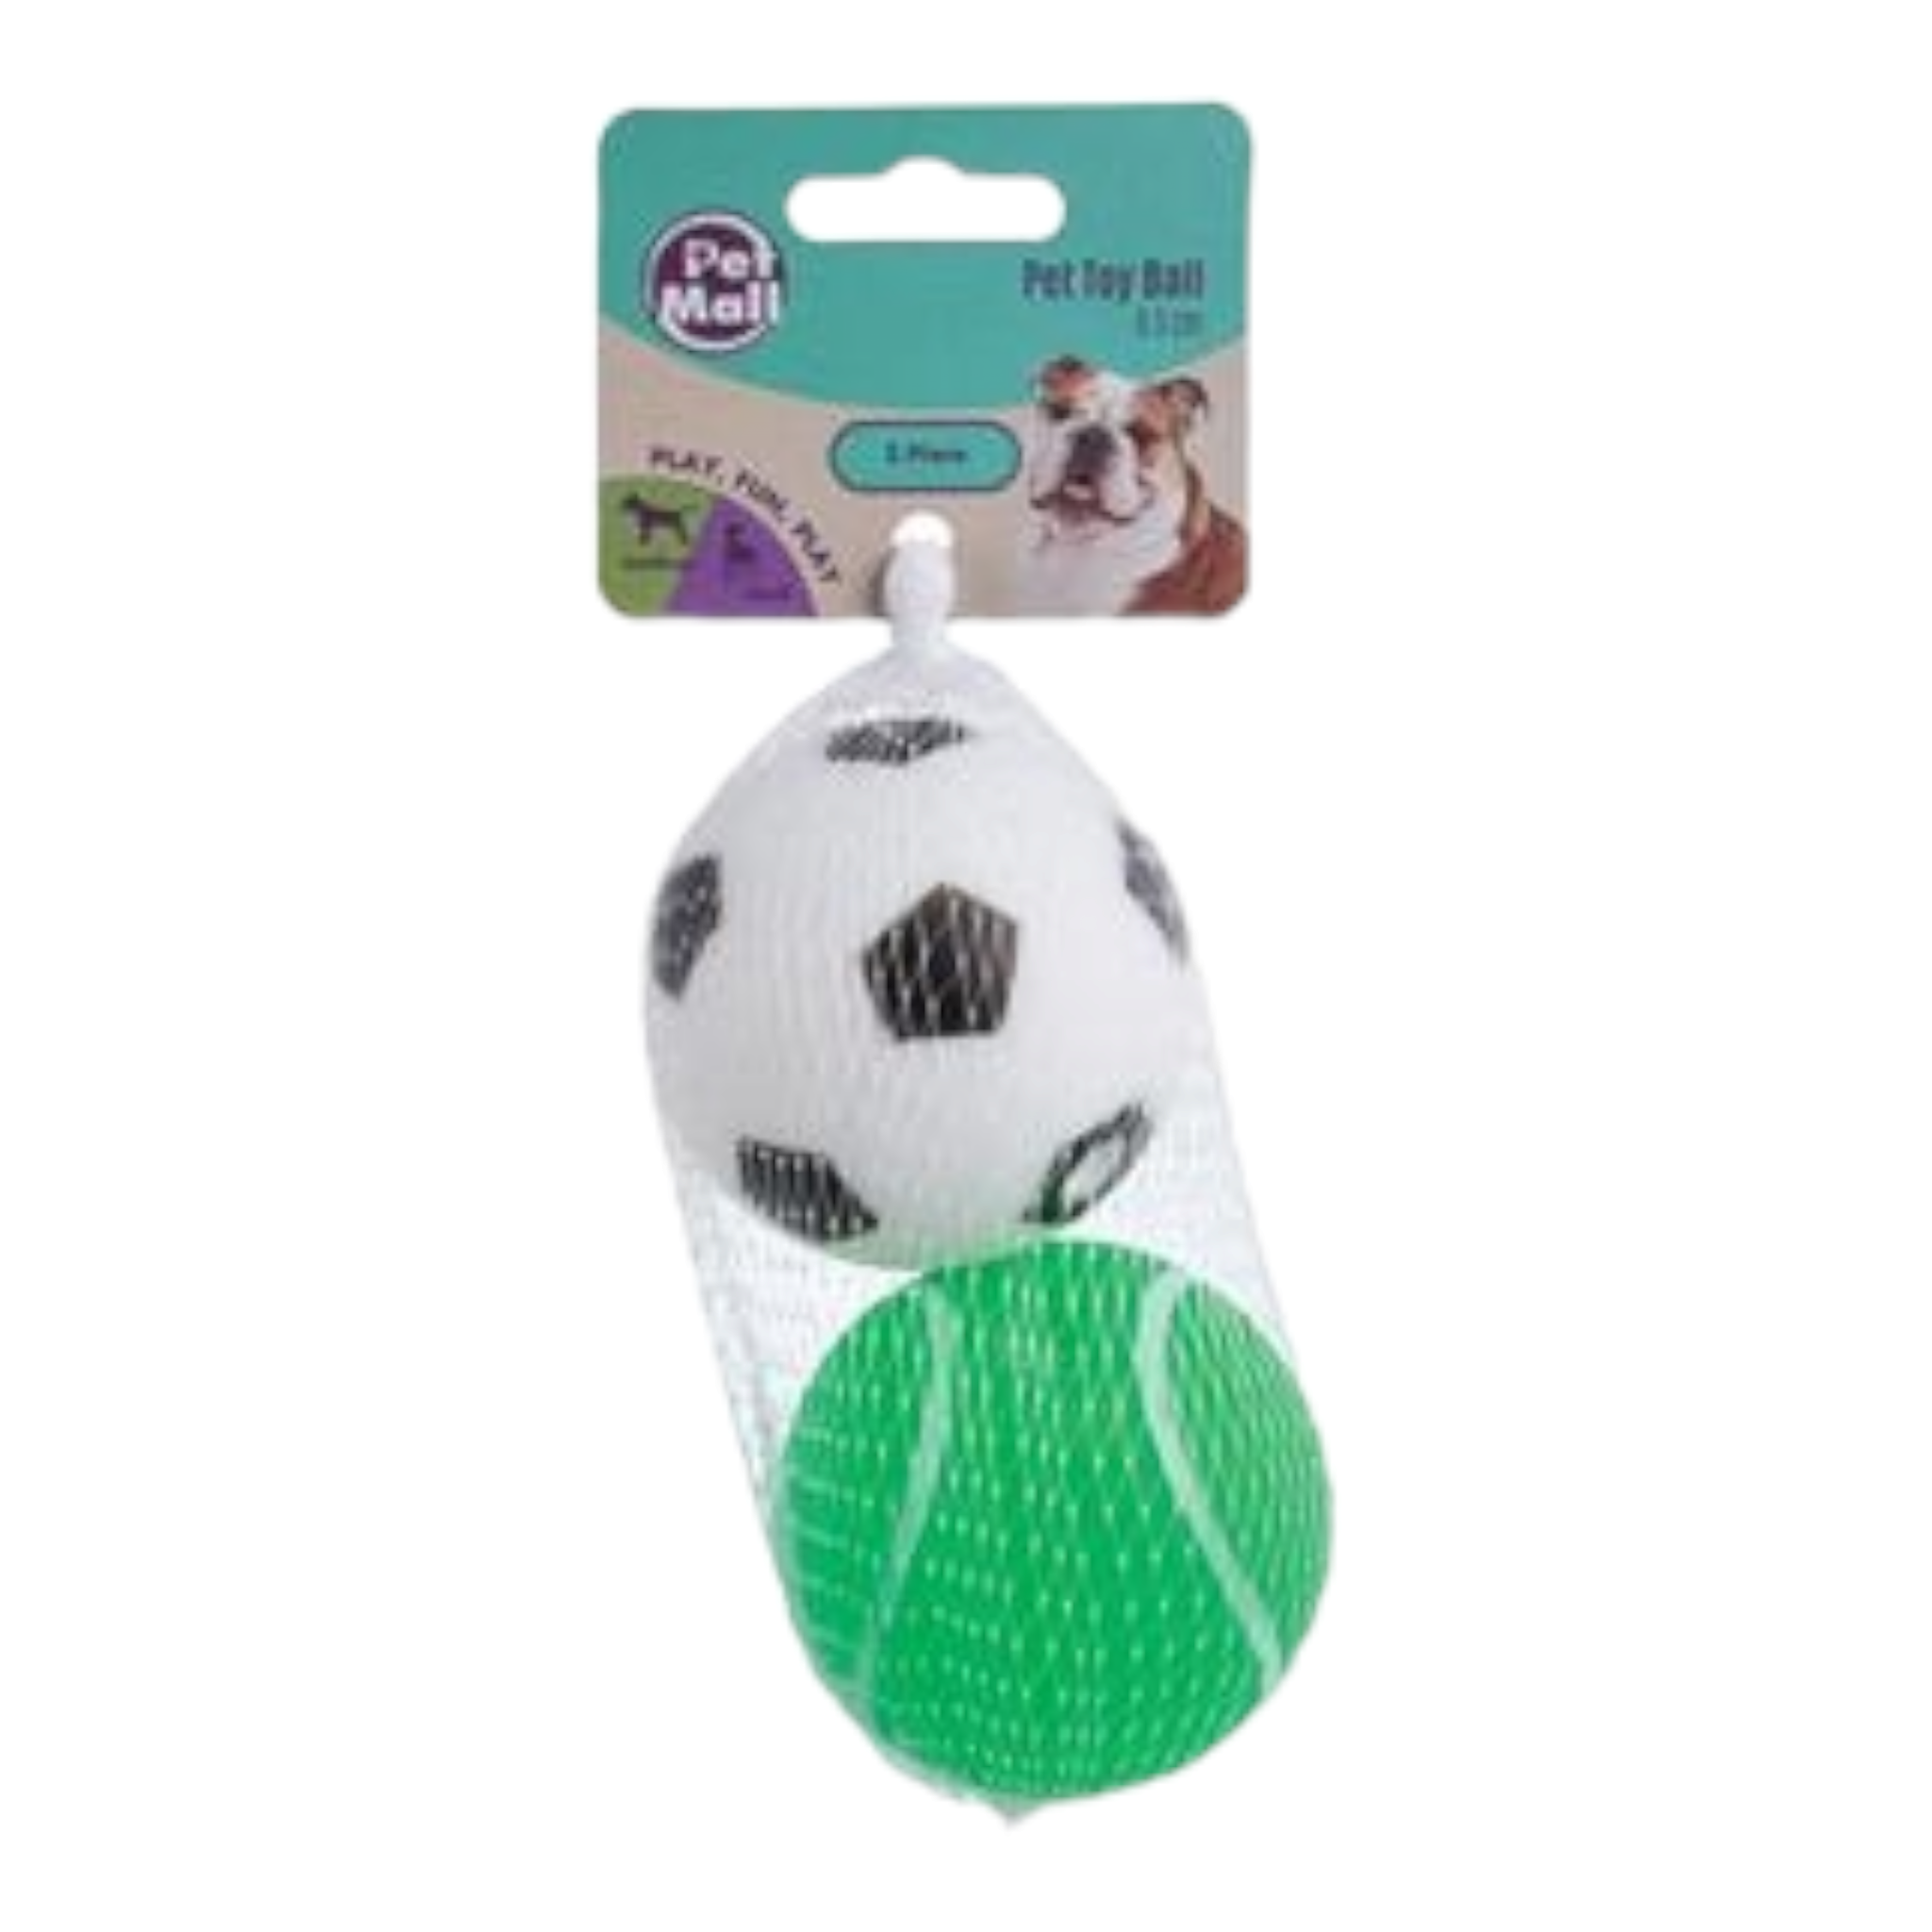 Pet Mall Dog Toy Vinly Ball 6.5cm 2pack